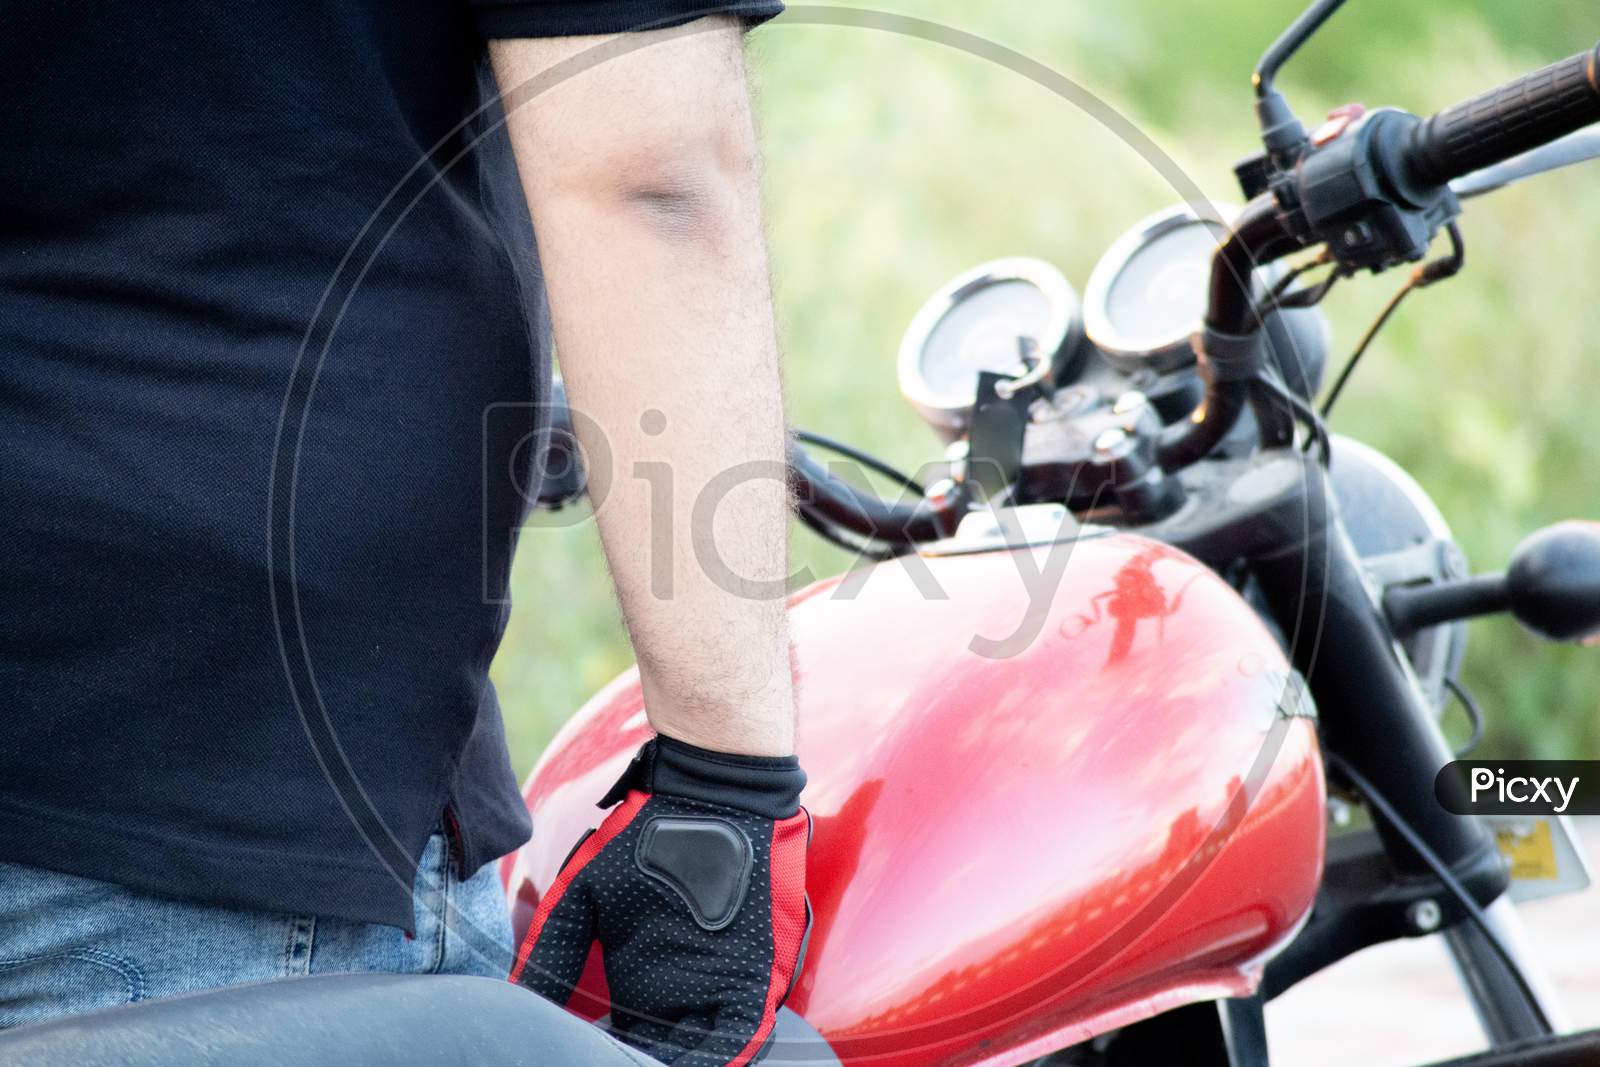 Young Indian Man Wearing Red Riding Gloves With Protection While Holding The Handle Bars Of A Motorcycle With A Red Tank